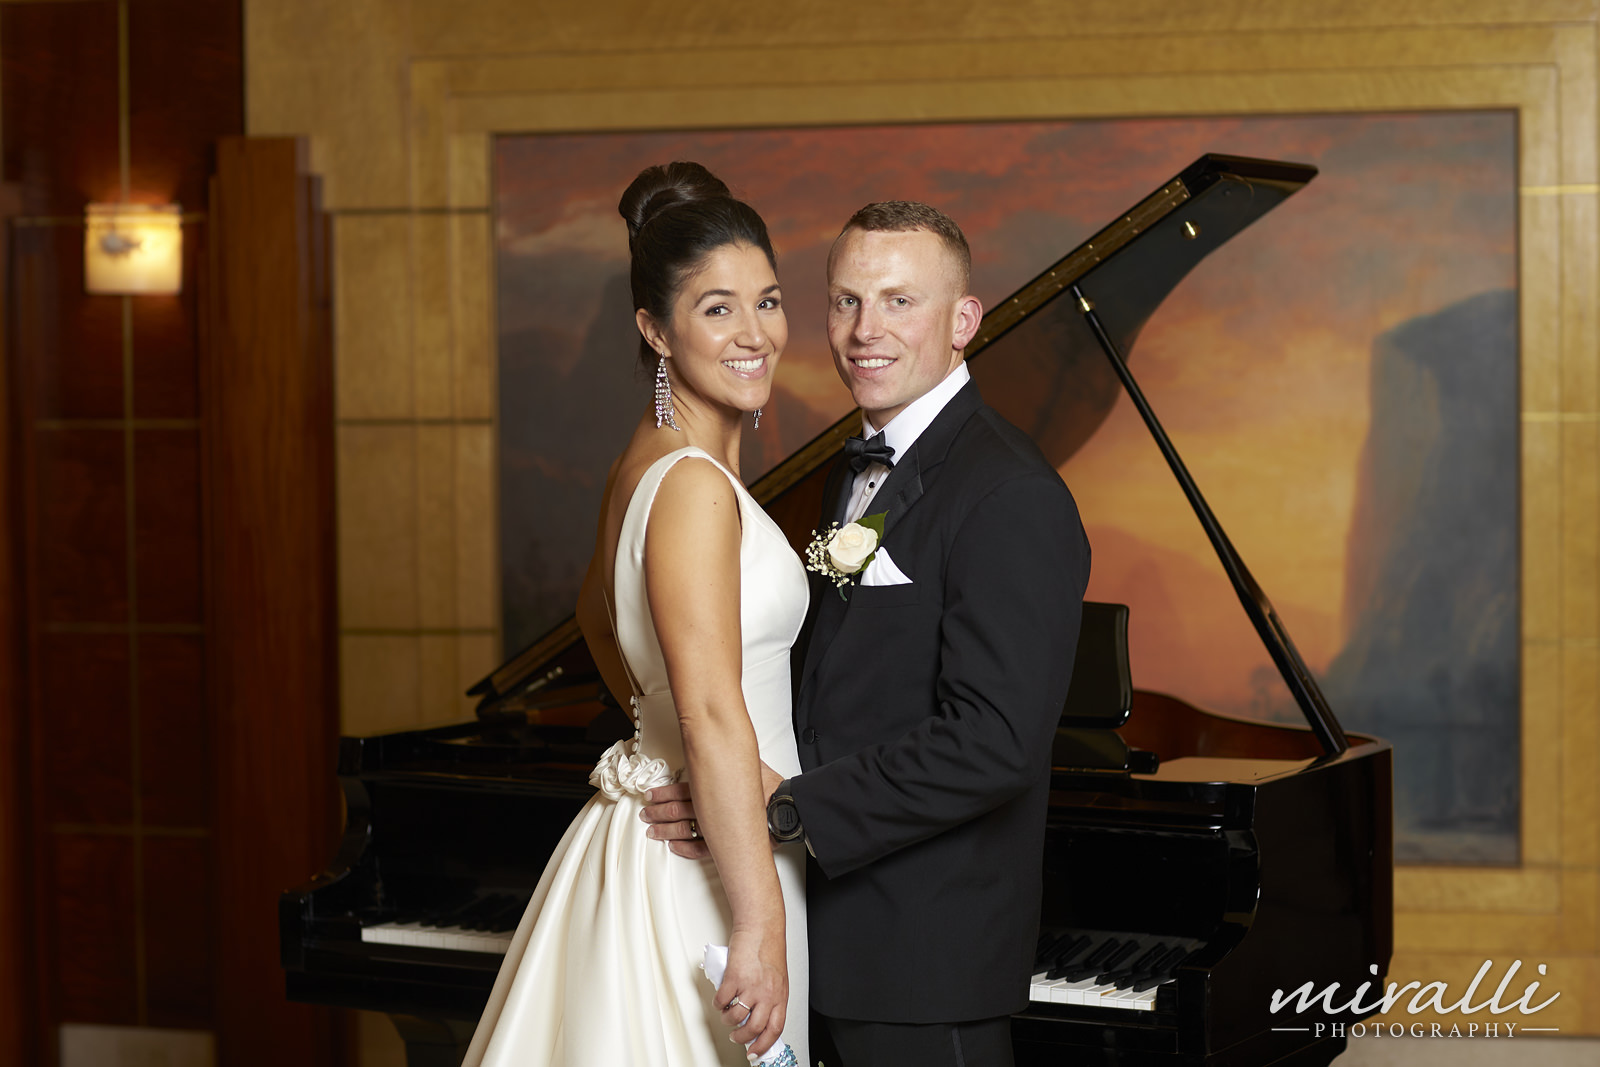 Chateau Briand Wedding Photos by Miralli Photography